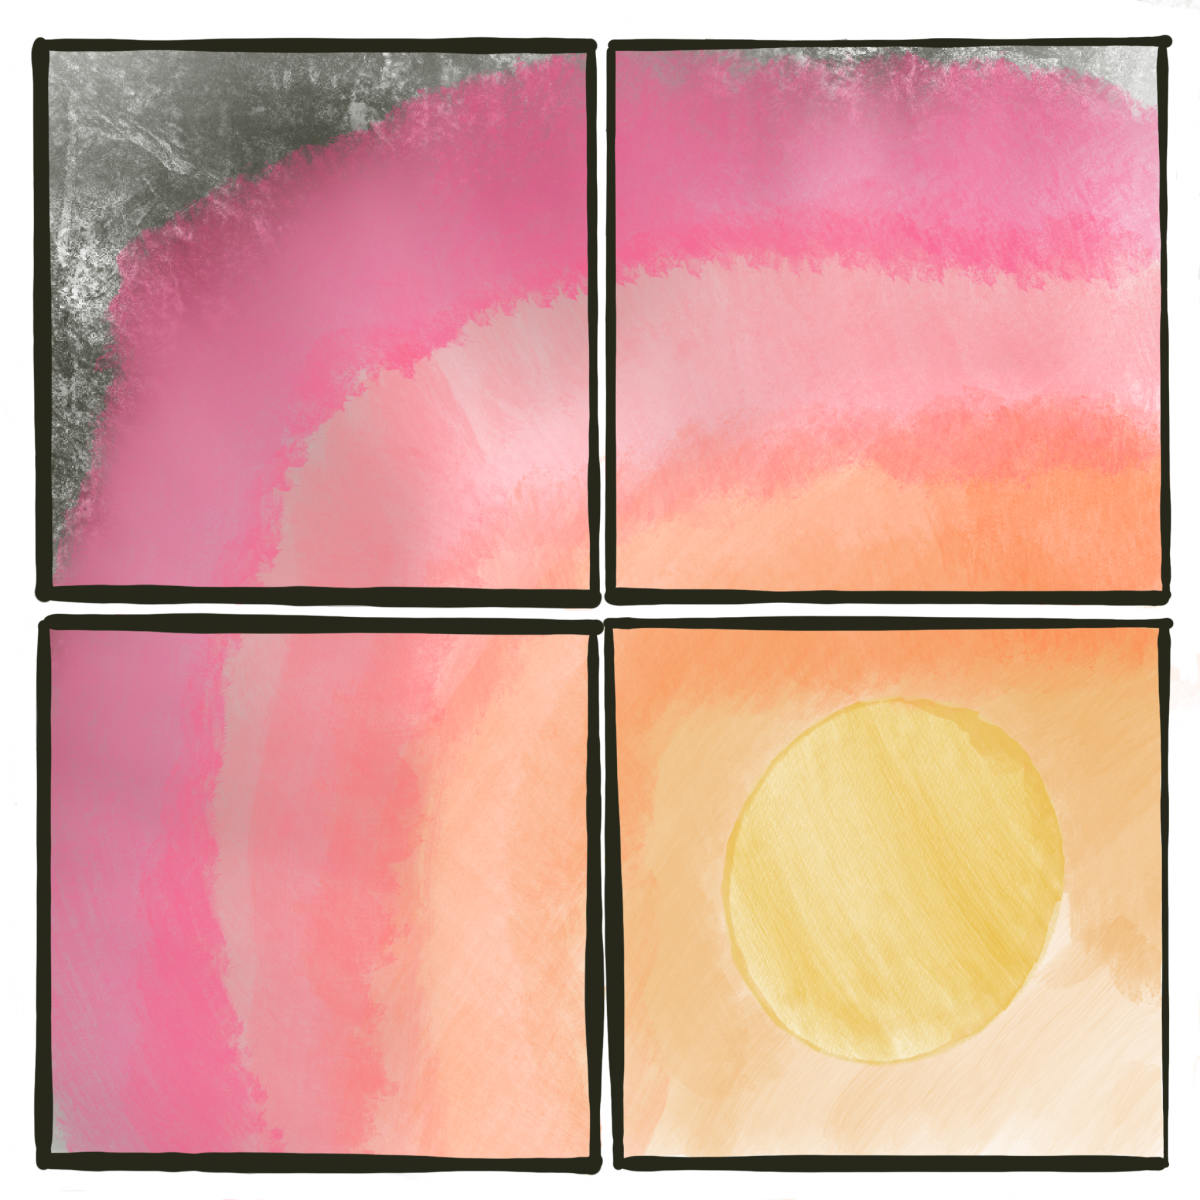 Illustration of four square frames. On the bottom right, is a yellow circle and radiating from it are waves of orange, pink, and purple colors. At the top left uppermost corner is some shadowy black color.